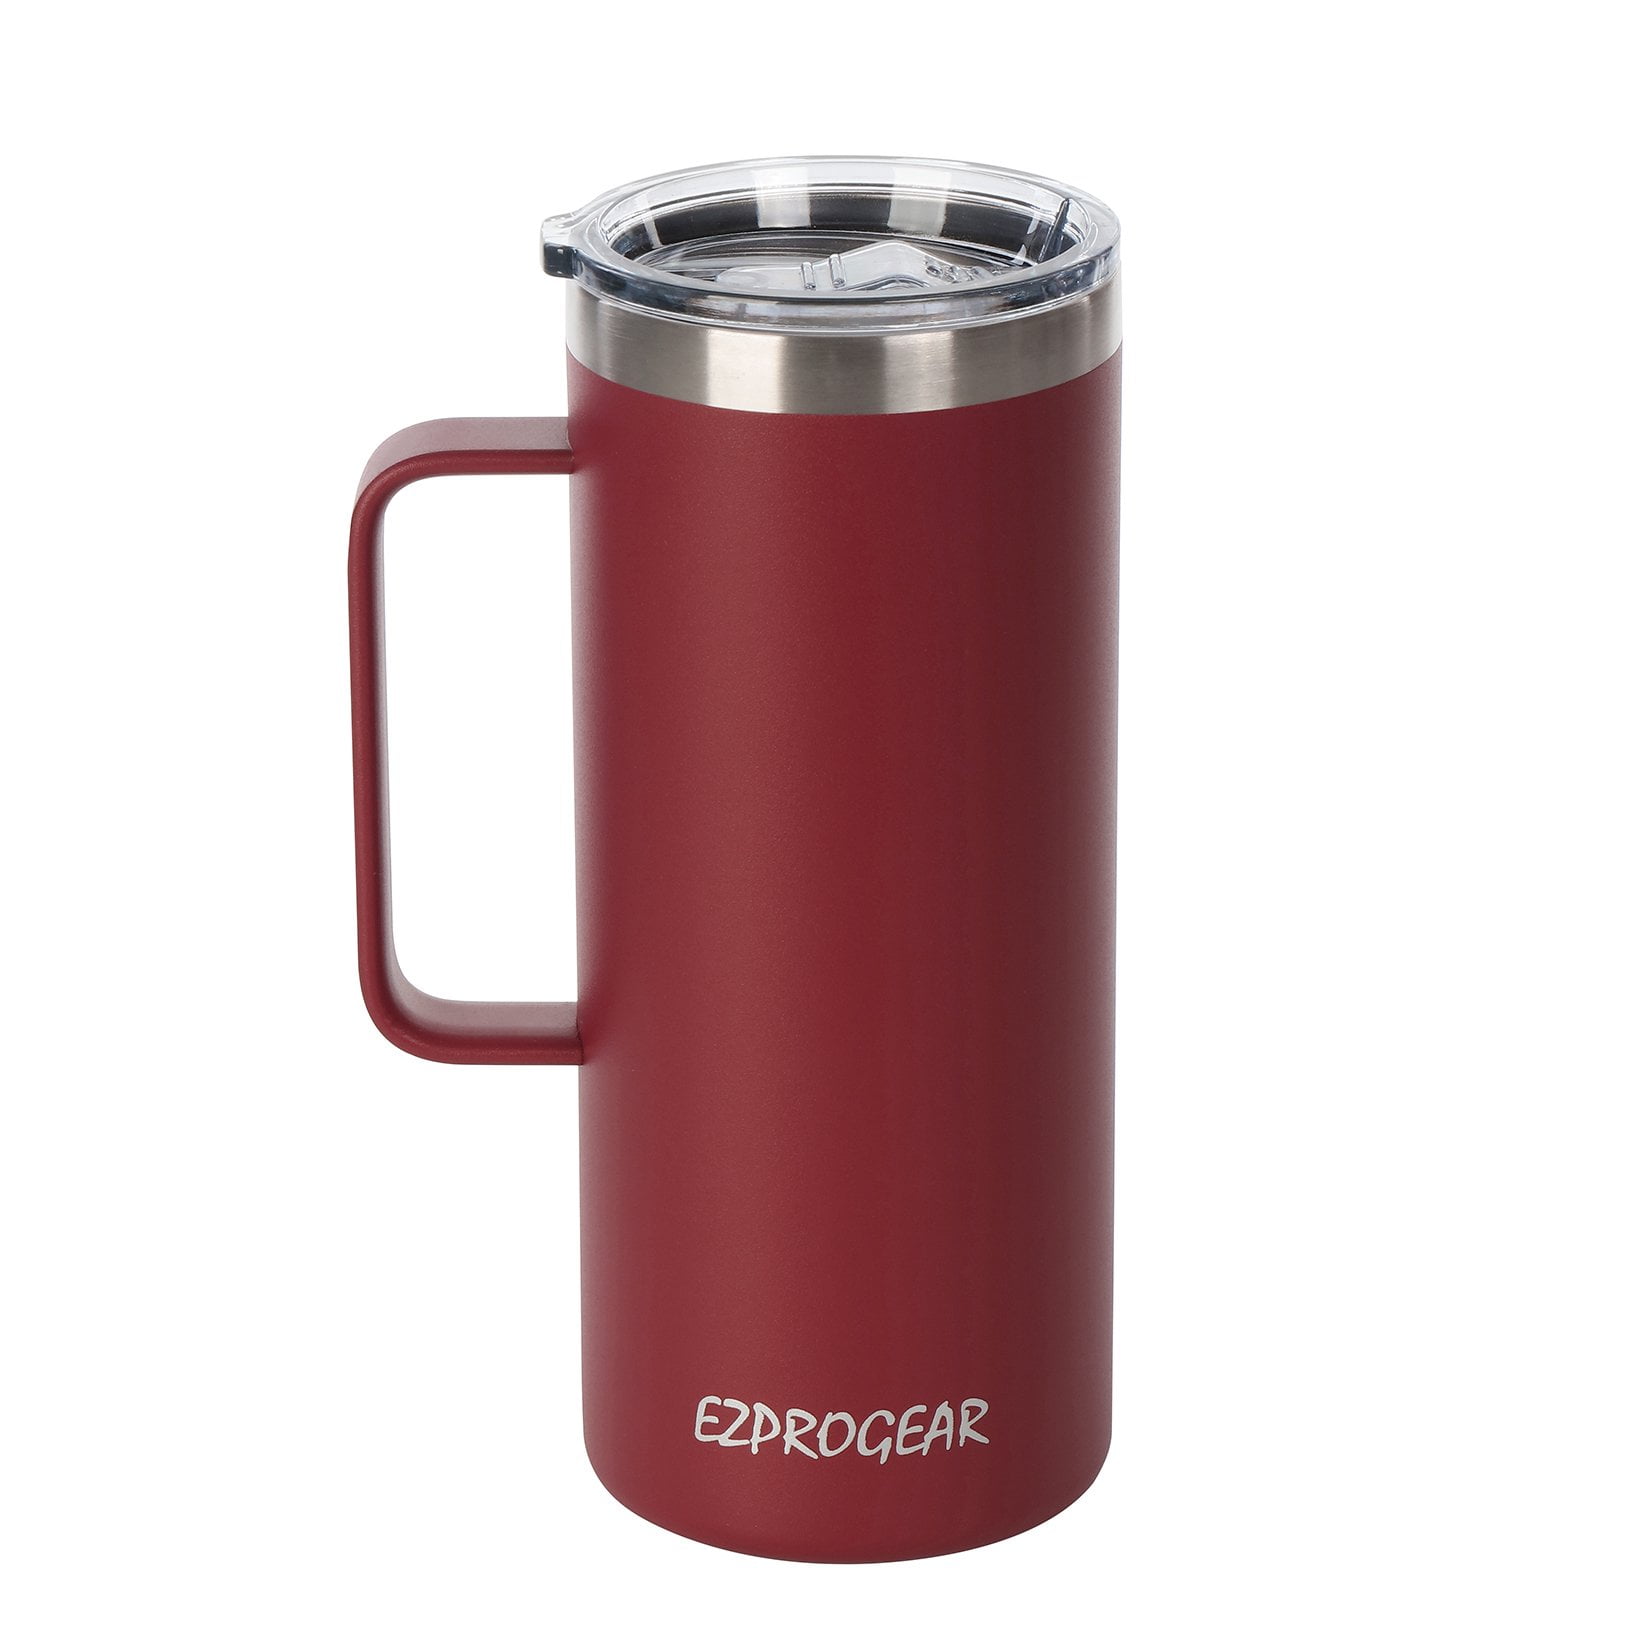  VOLCAROCK Coffee Cup with Handle, 16oz Insulated Stainless  Steel Coffee Travel Mug, Double Wall Vacuum Reusable Camp Mug with Lid,  Ideal for Hot & Cold Drinks (Brick Red): Home & Kitchen